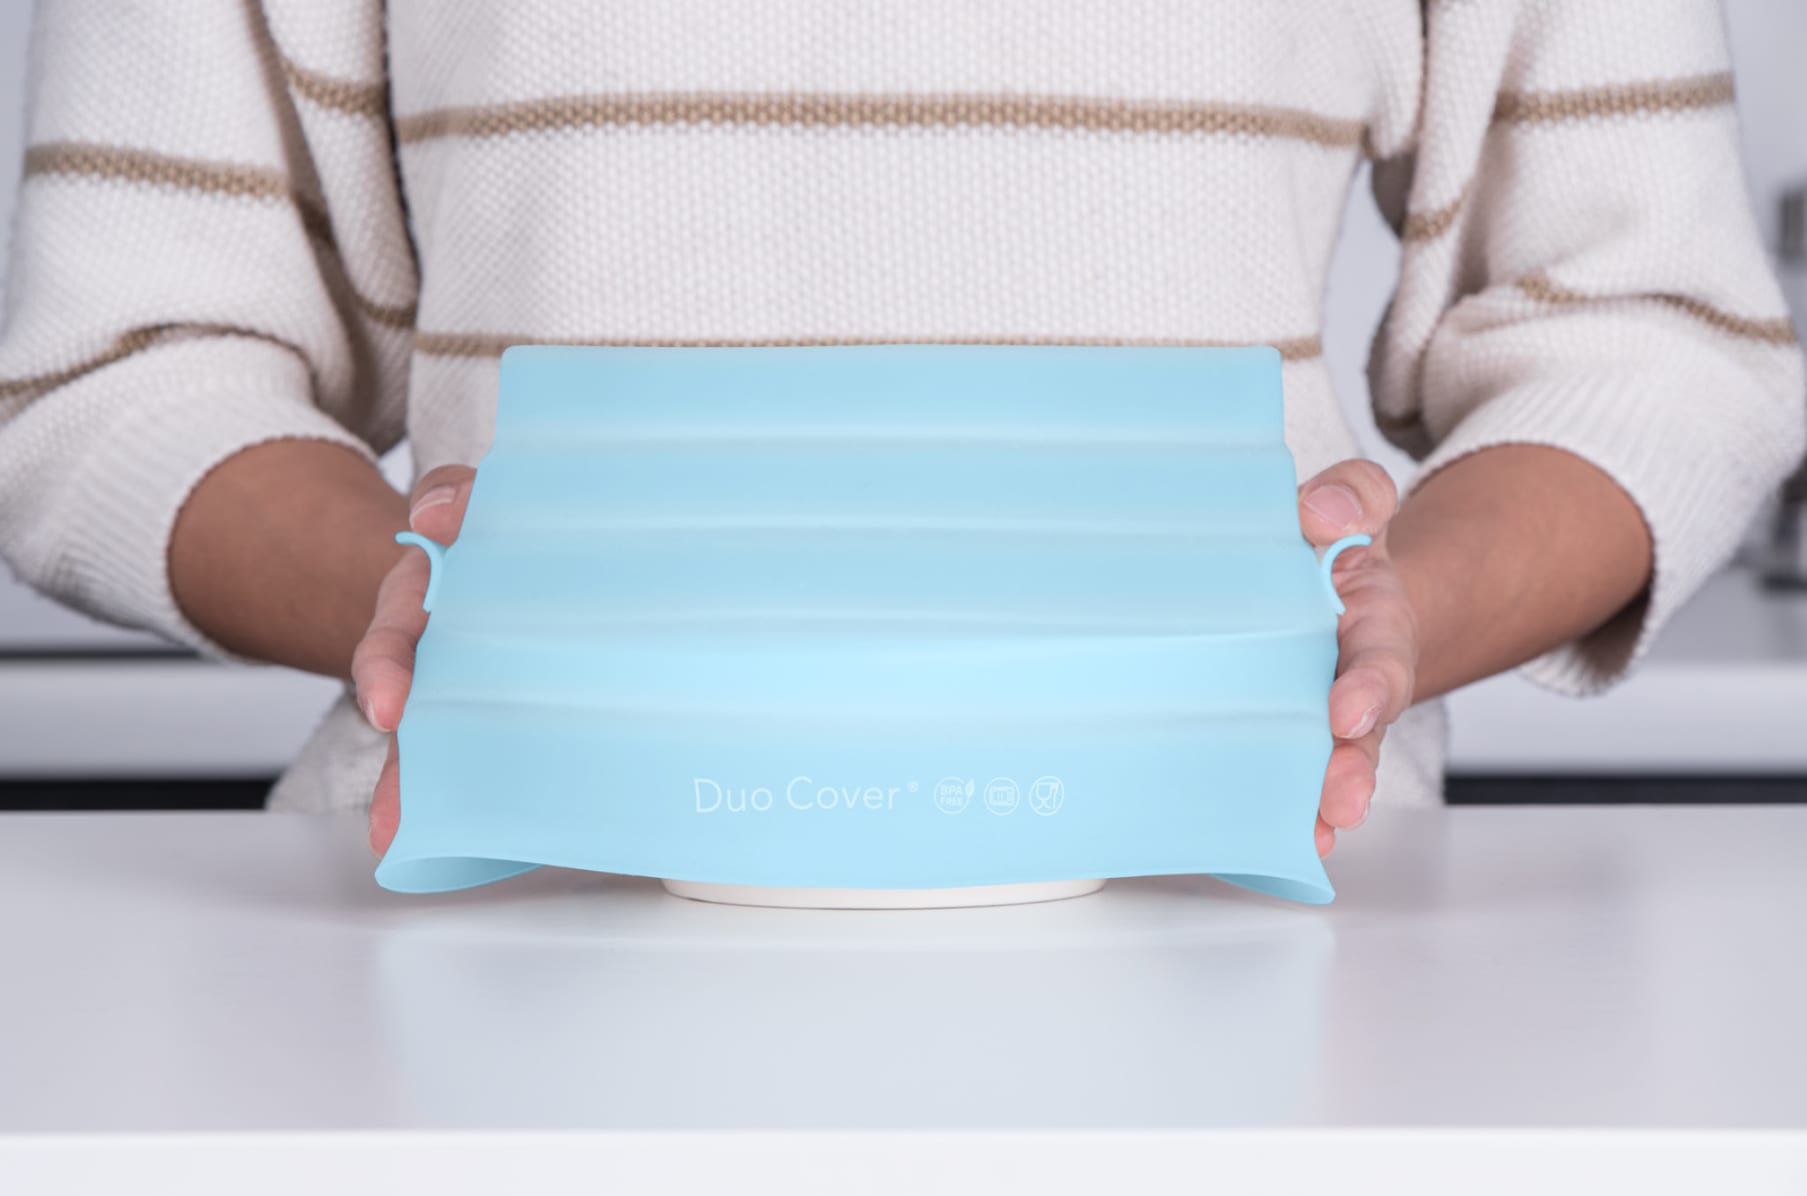 Duo Cover - Tap into your microwave's potential 🧲 